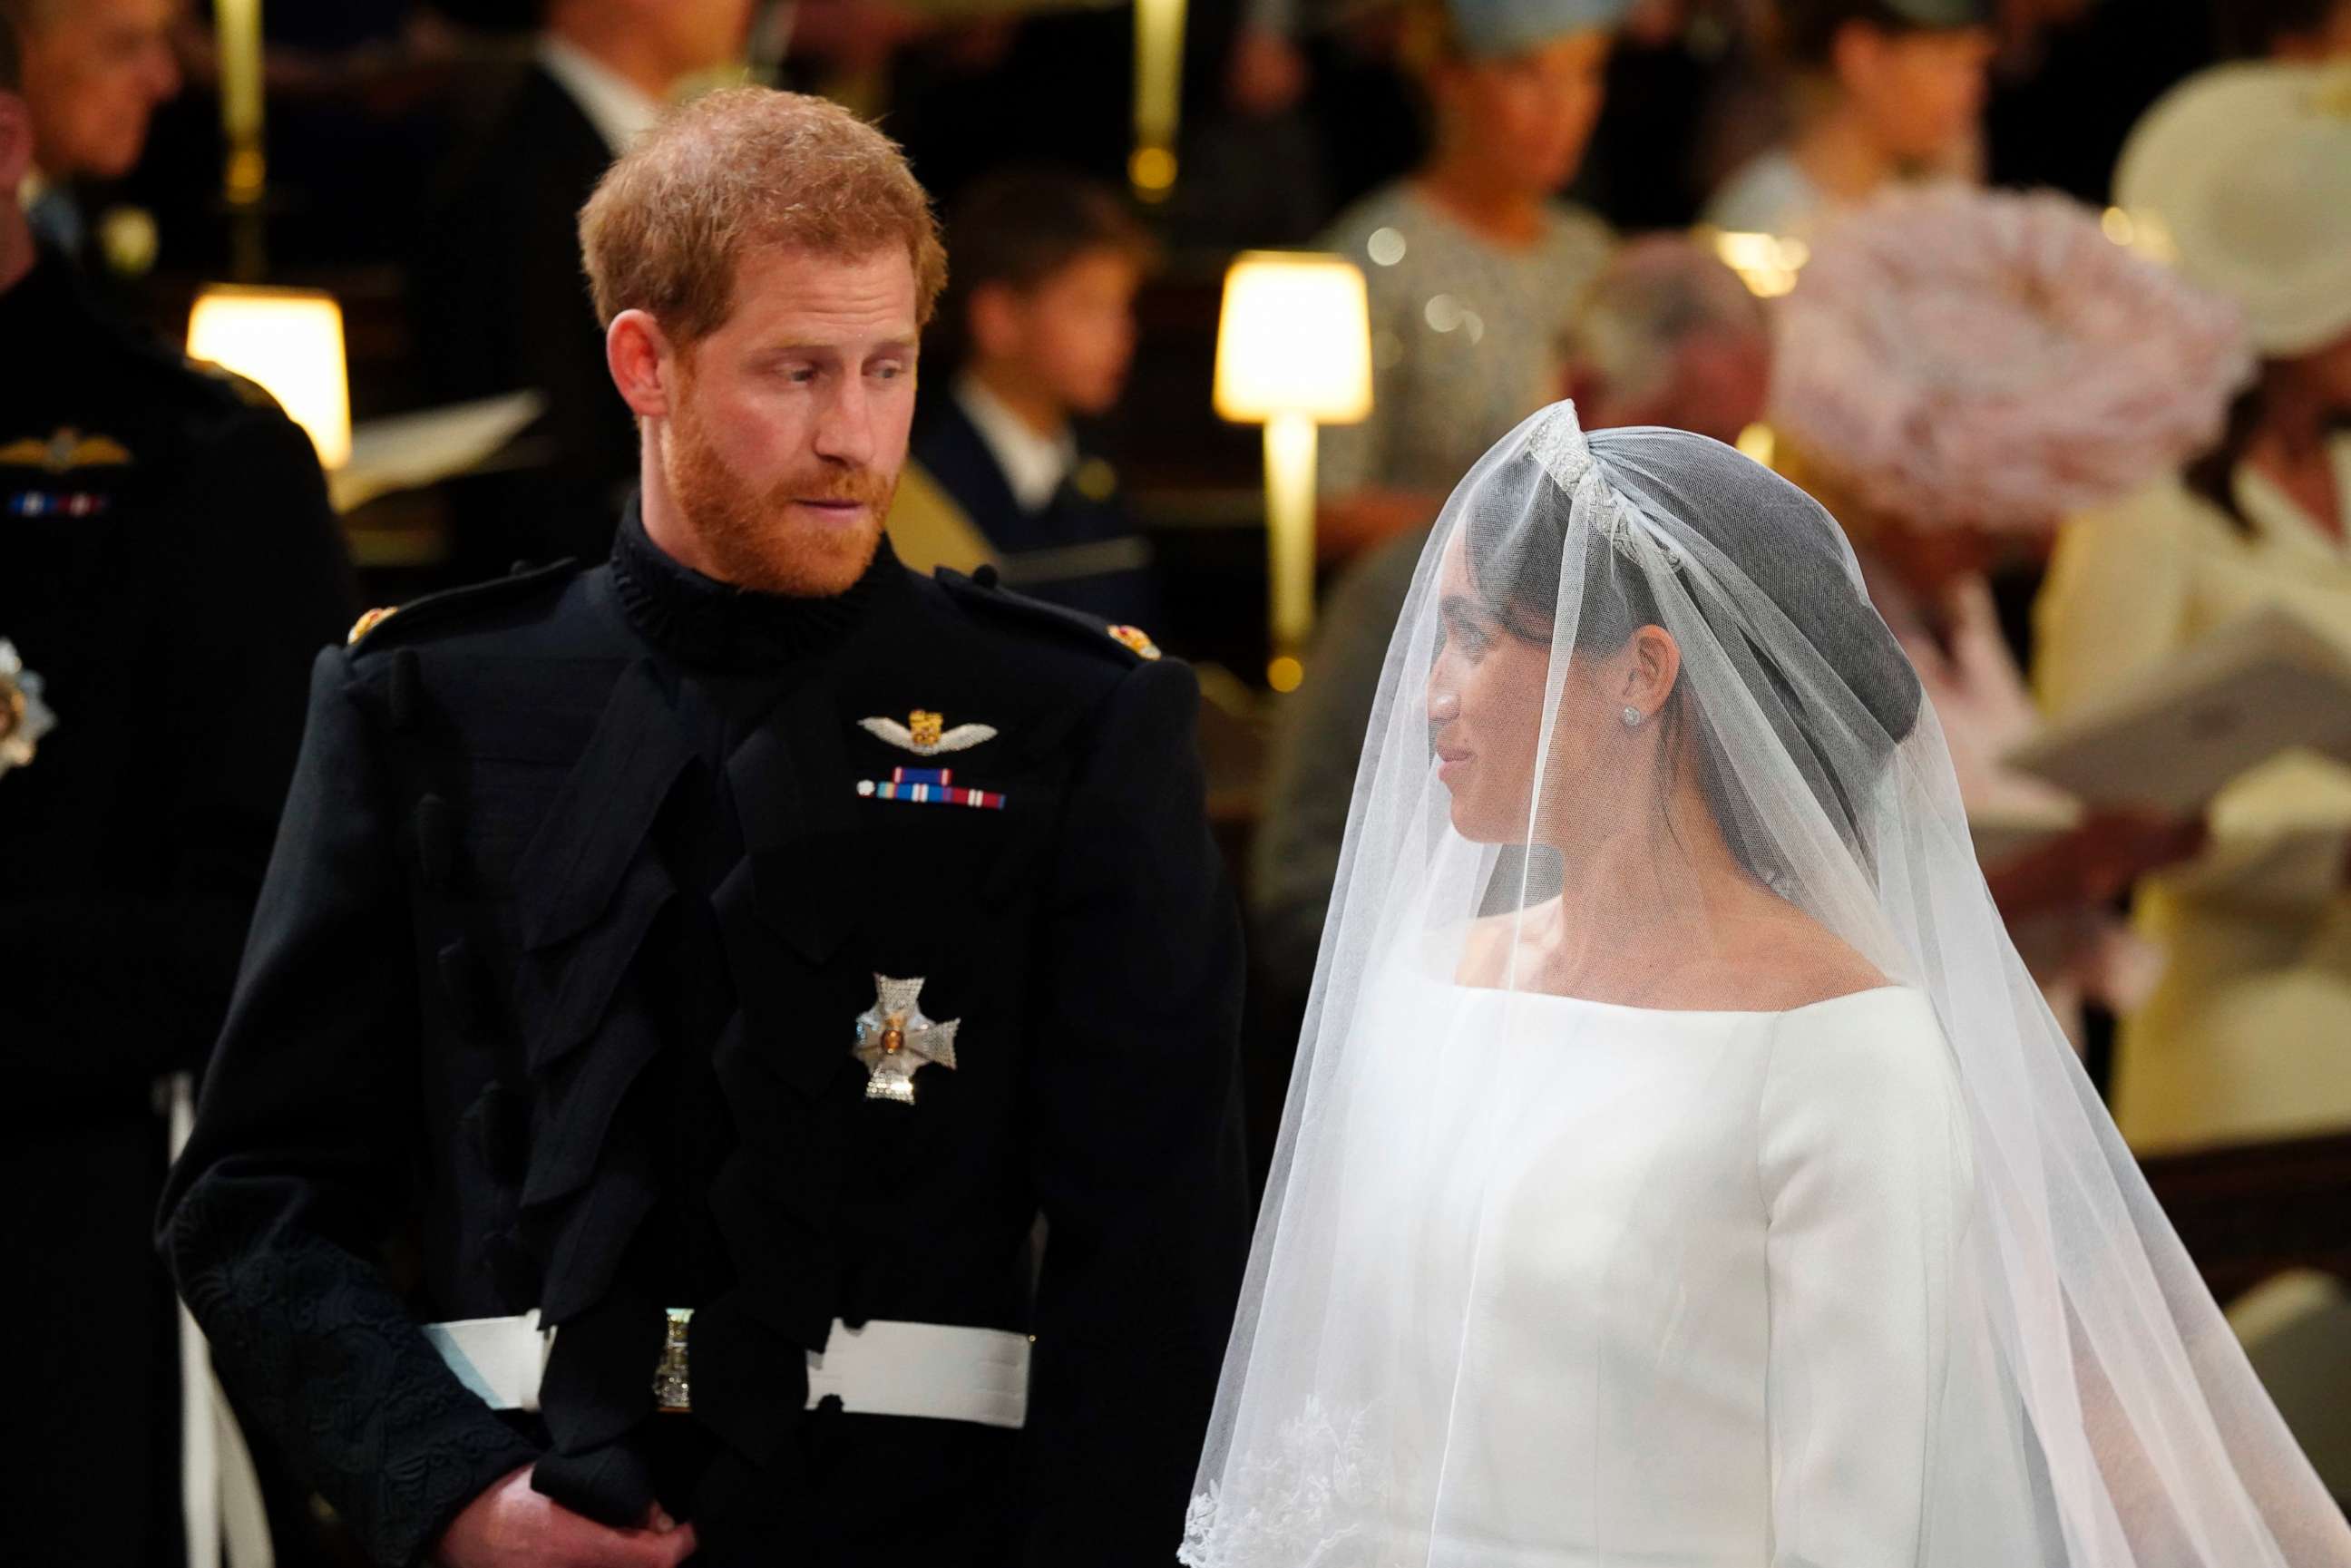 PHOTO: Prince Harry looks at his bride, Meghan Markle, during their wedding ceremony at St. George's Chapel in Windsor Castle in Windsor, May 19, 2018. 